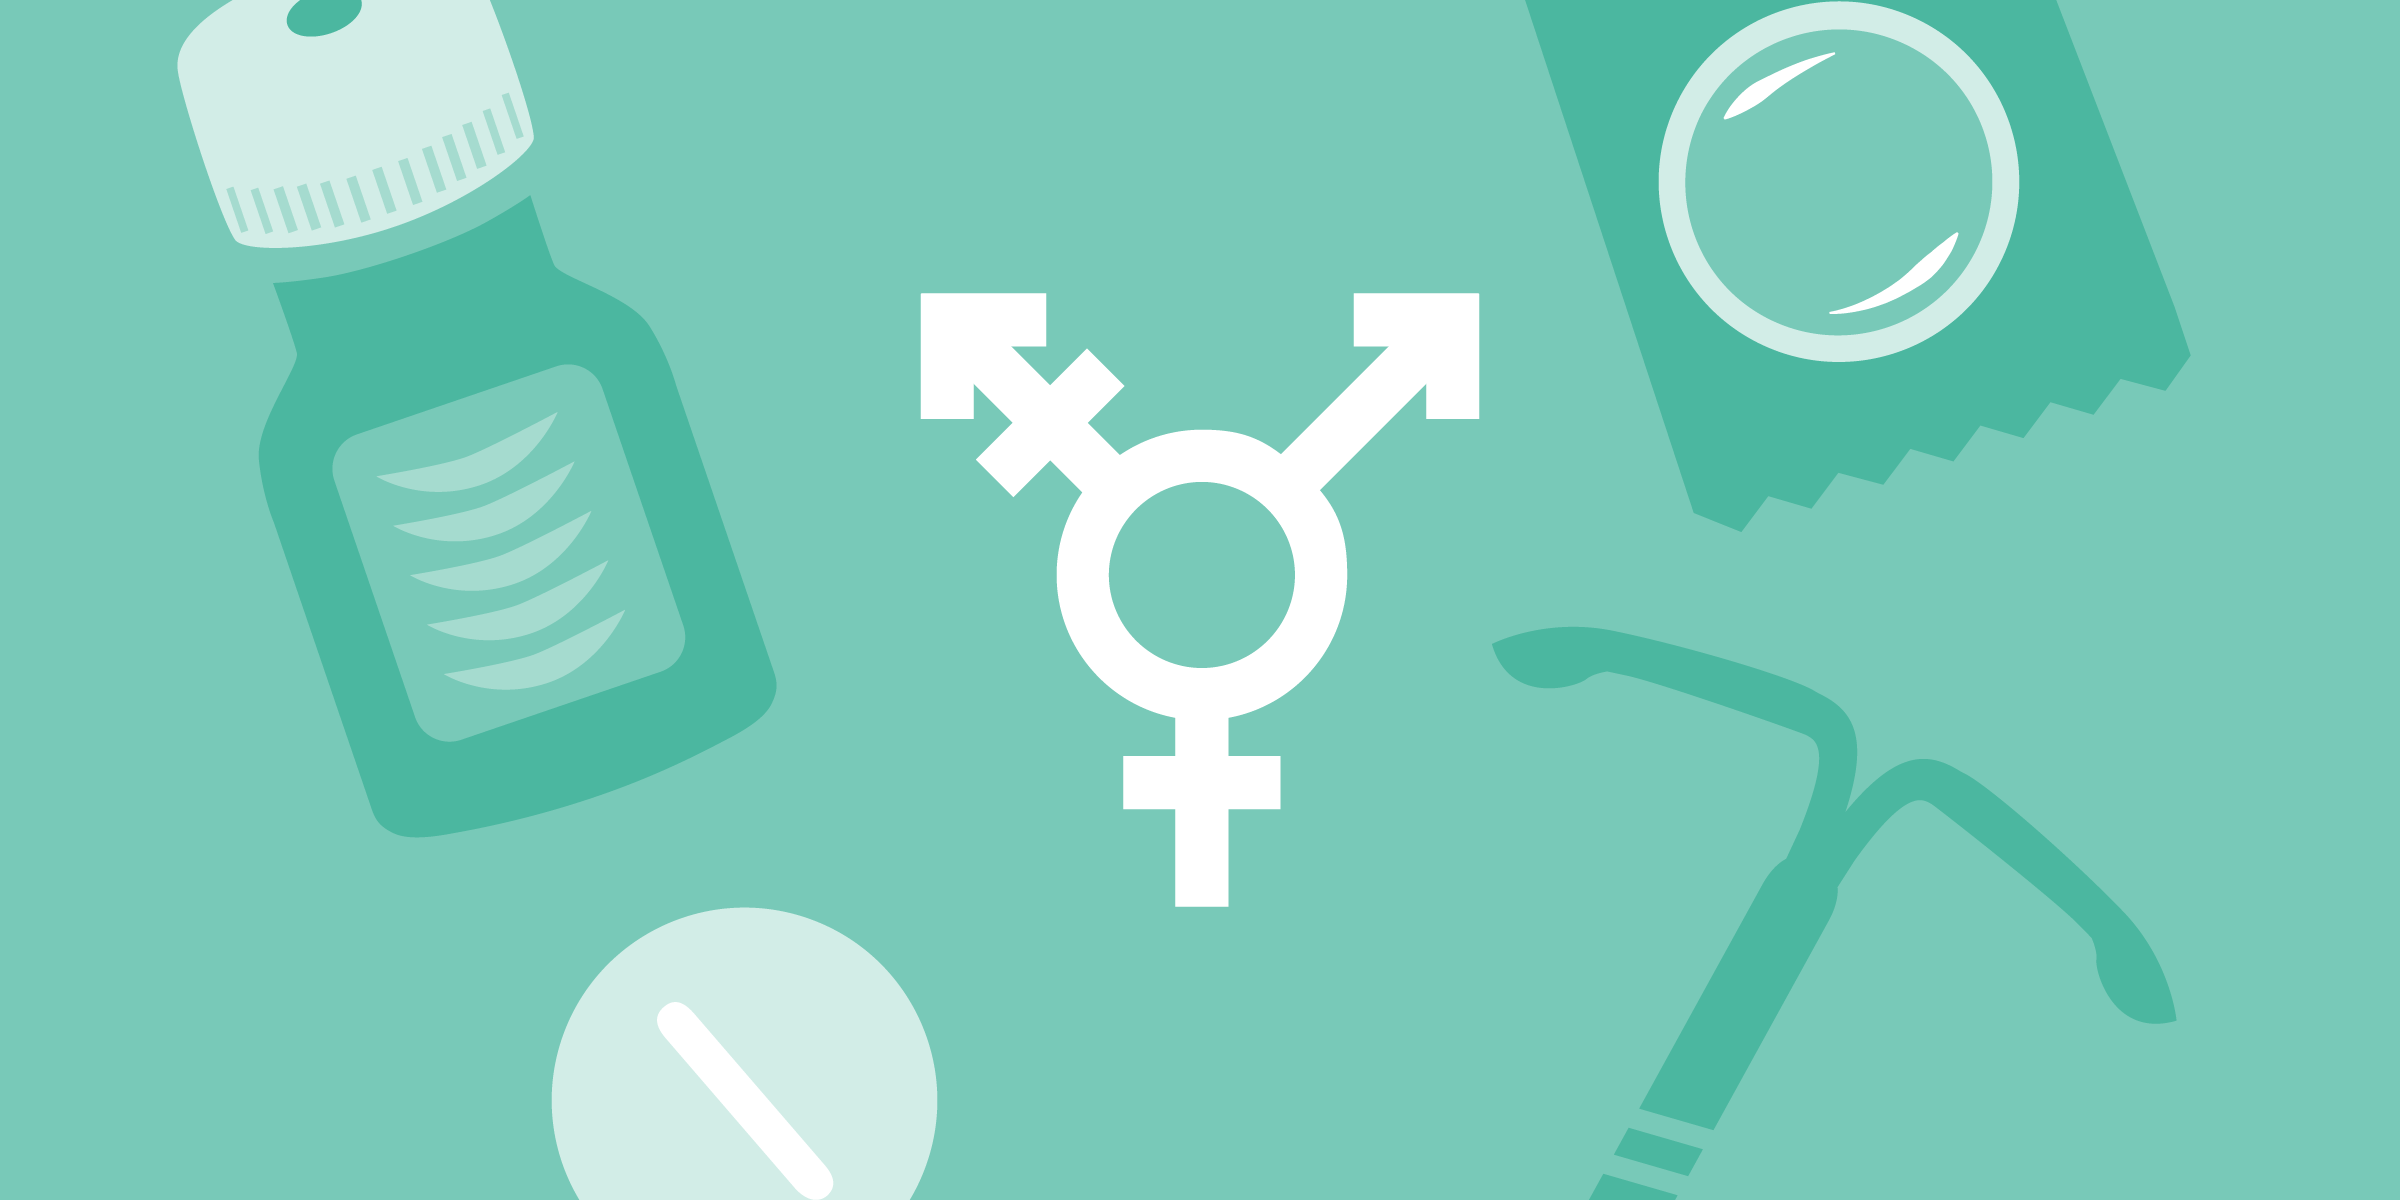 An illustration of the transgender symbol surrounded by different forms of birth control